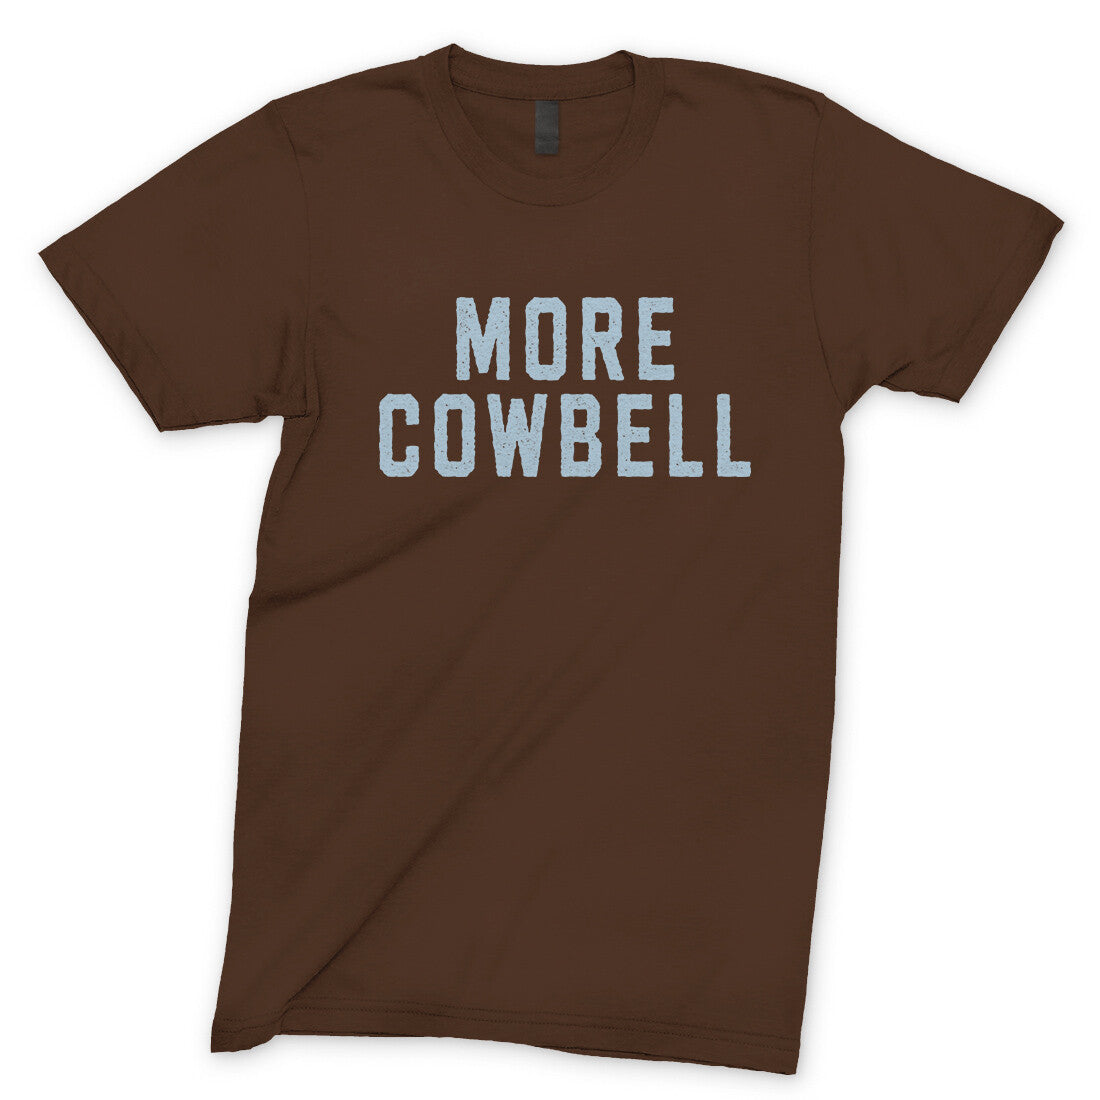 More Cowbell in Dark Chocolate Color